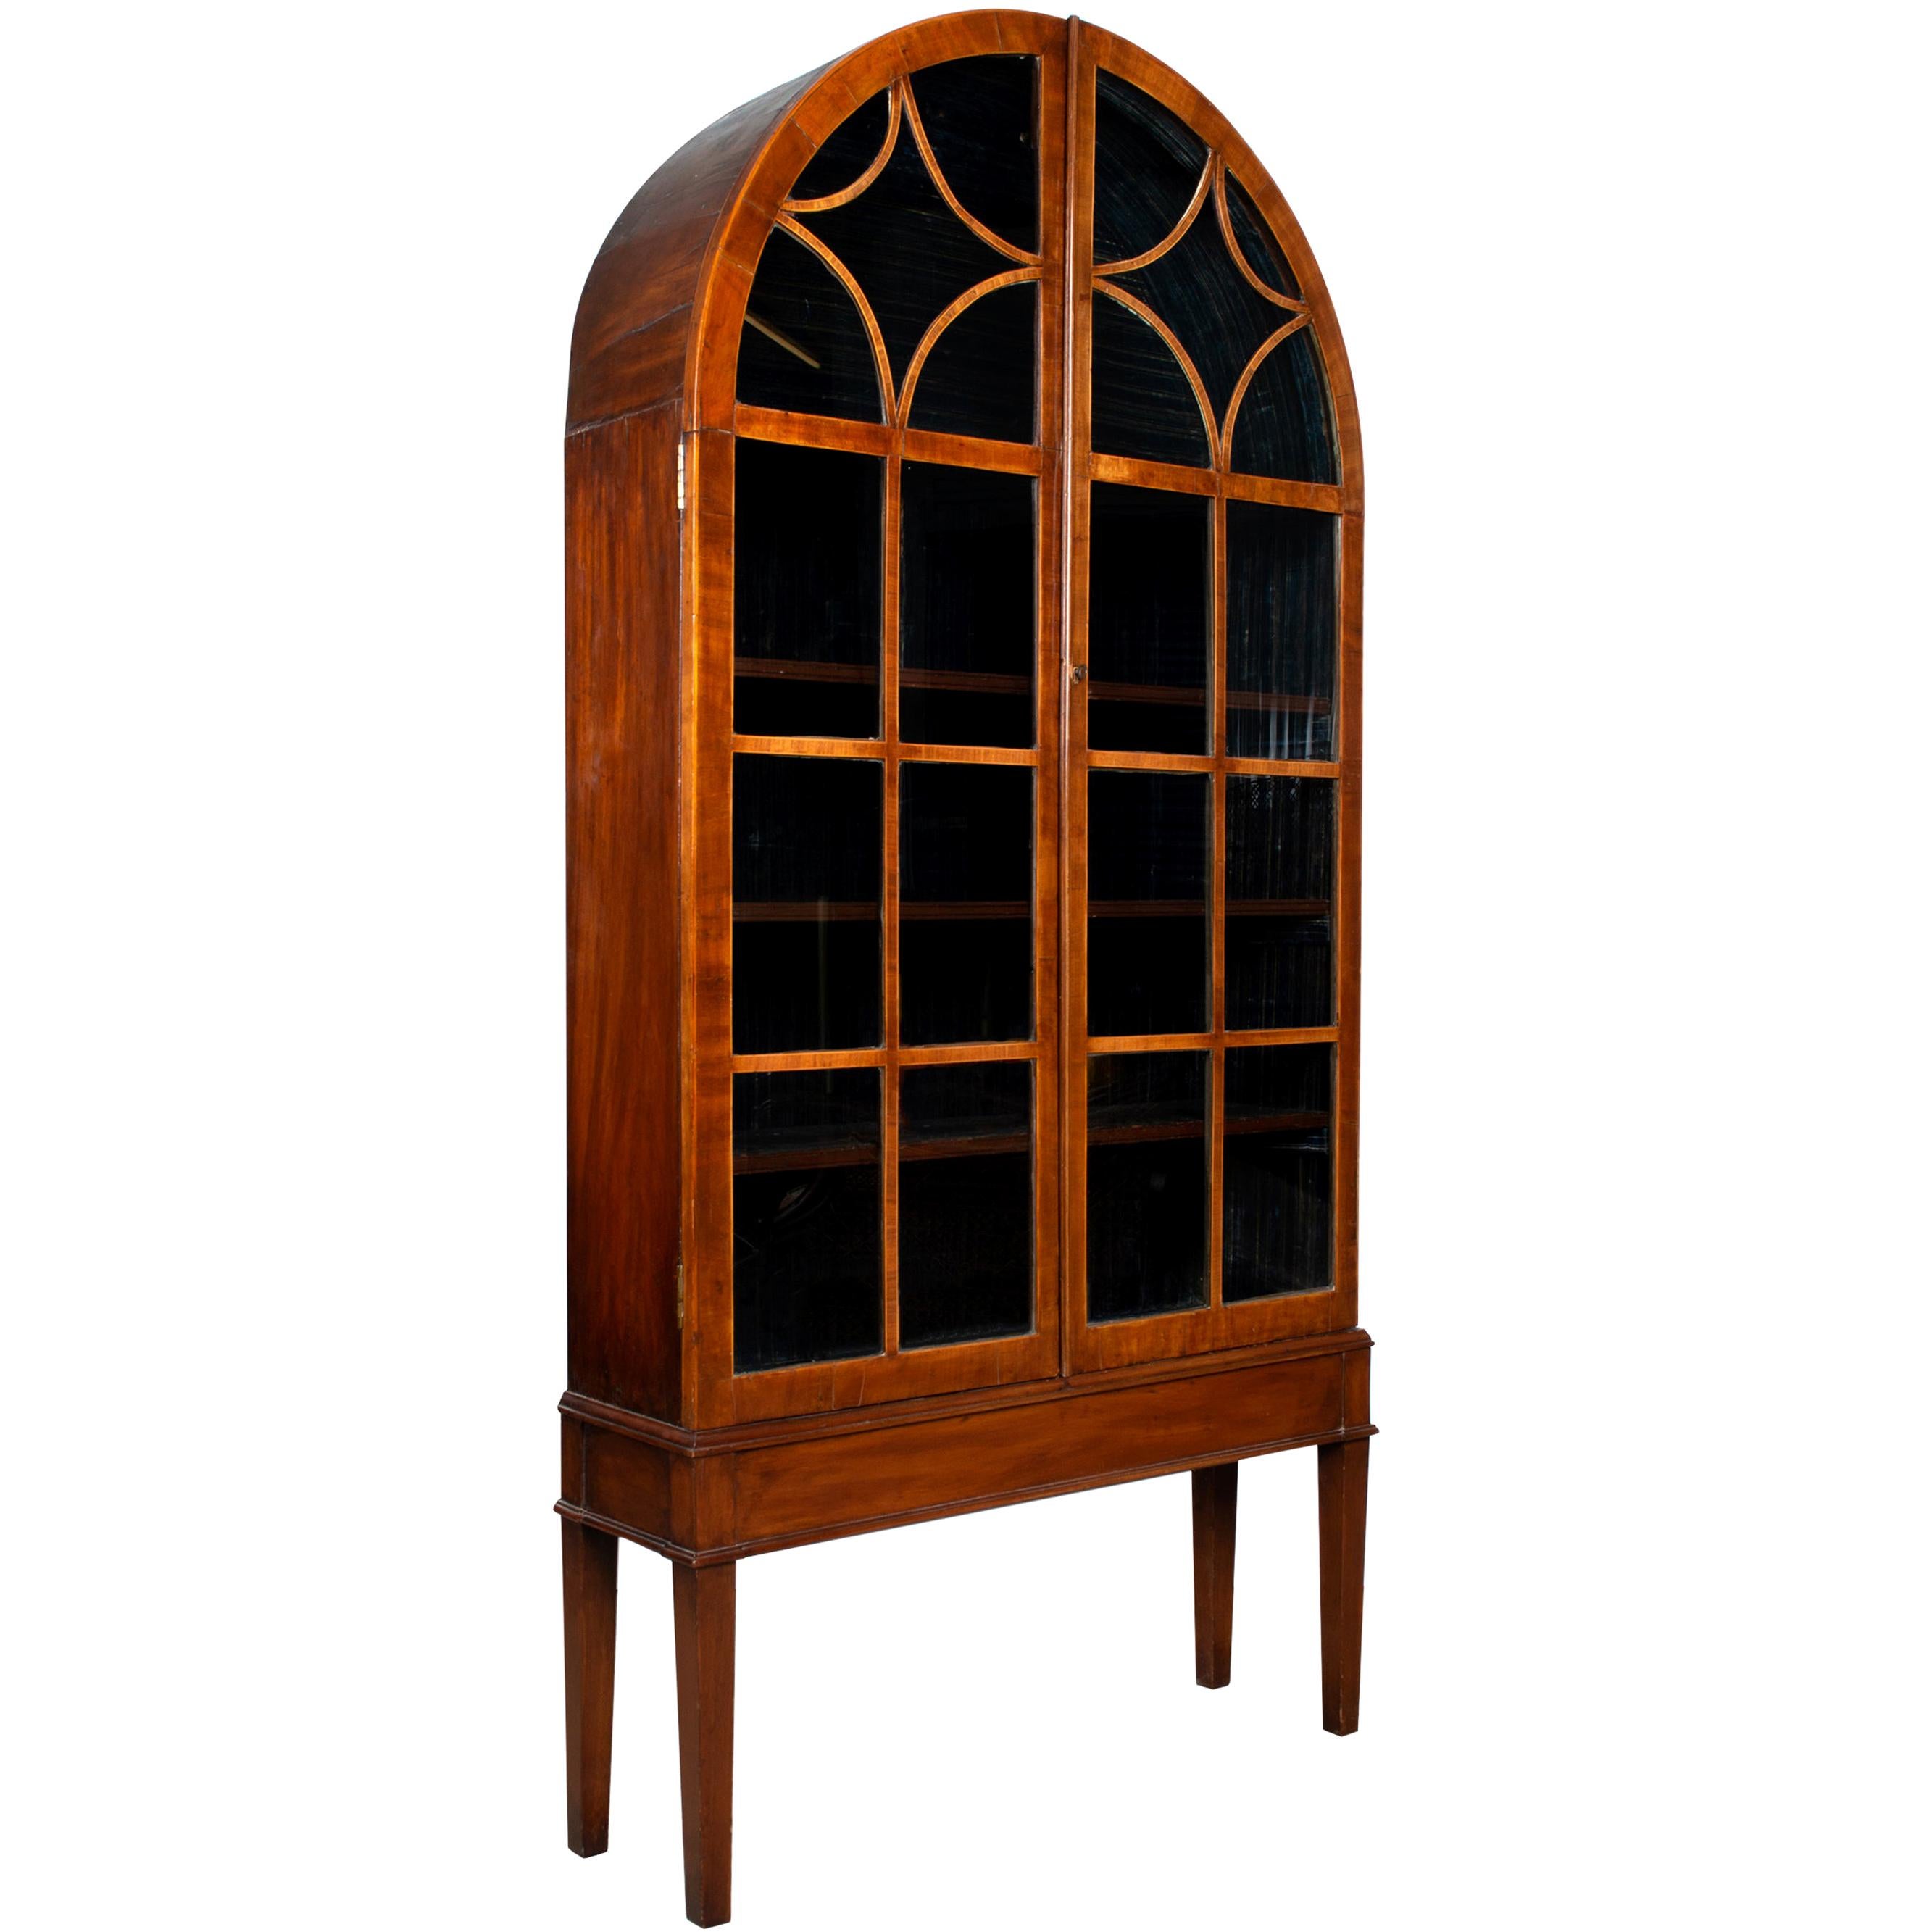 Antique Art Deco Dome Shaped Vitrine / Display Cabinet, England, circa 1920  For Sale at 1stDibs | dome cabinet, vintage vitrine cabinet, art deco  display cabinet for sale